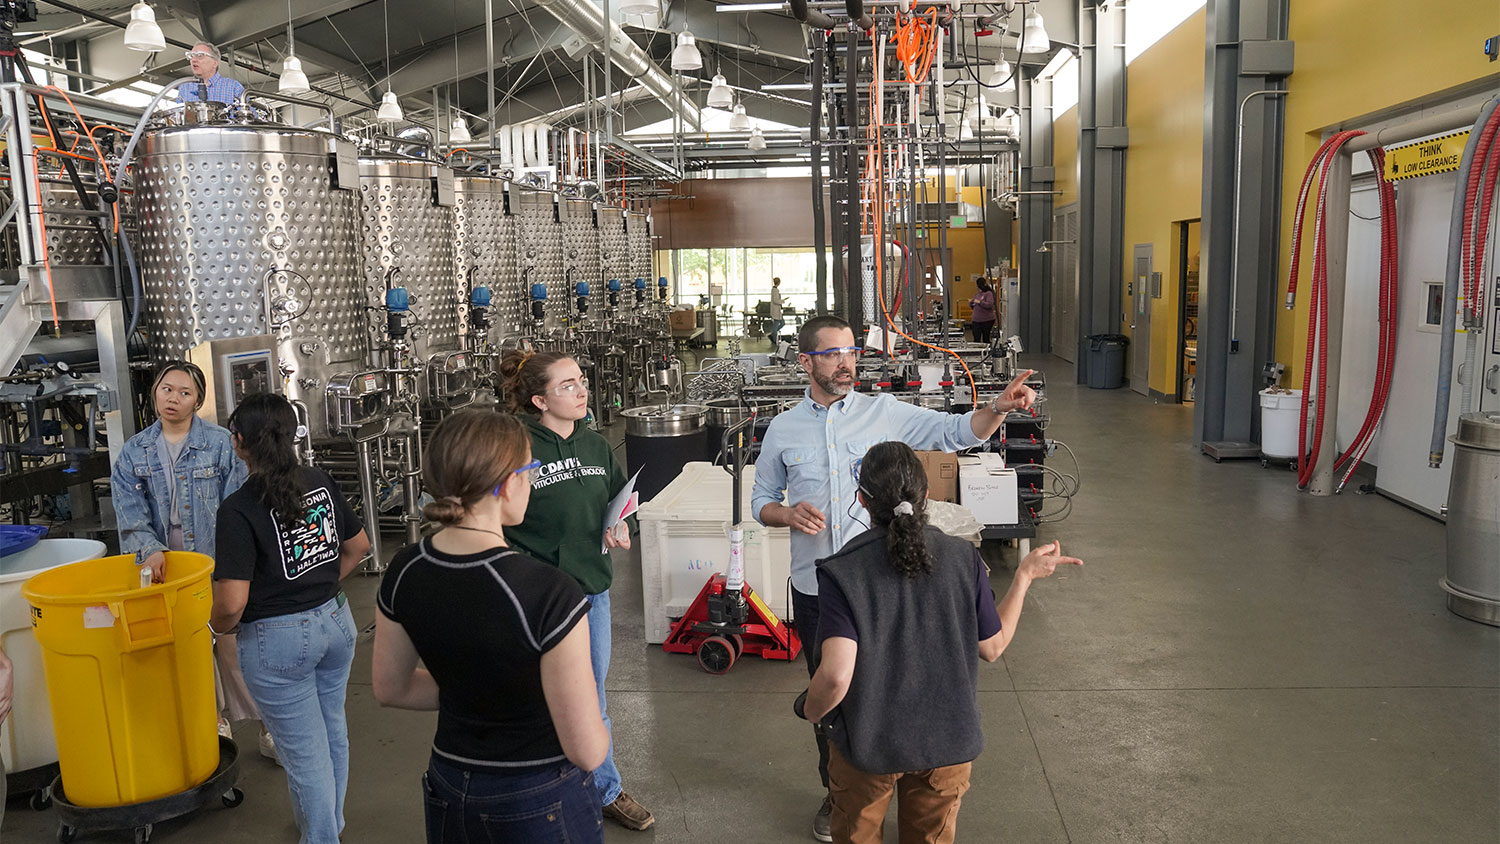 VEN127L instructors David Block (top left), Ben Montpetit (center background) and Leticia Chacon-Rodriguez (center foreground) guide their students through the state-of-the-art Teaching and Research Winery. (Karin Higgins/UC Davis)